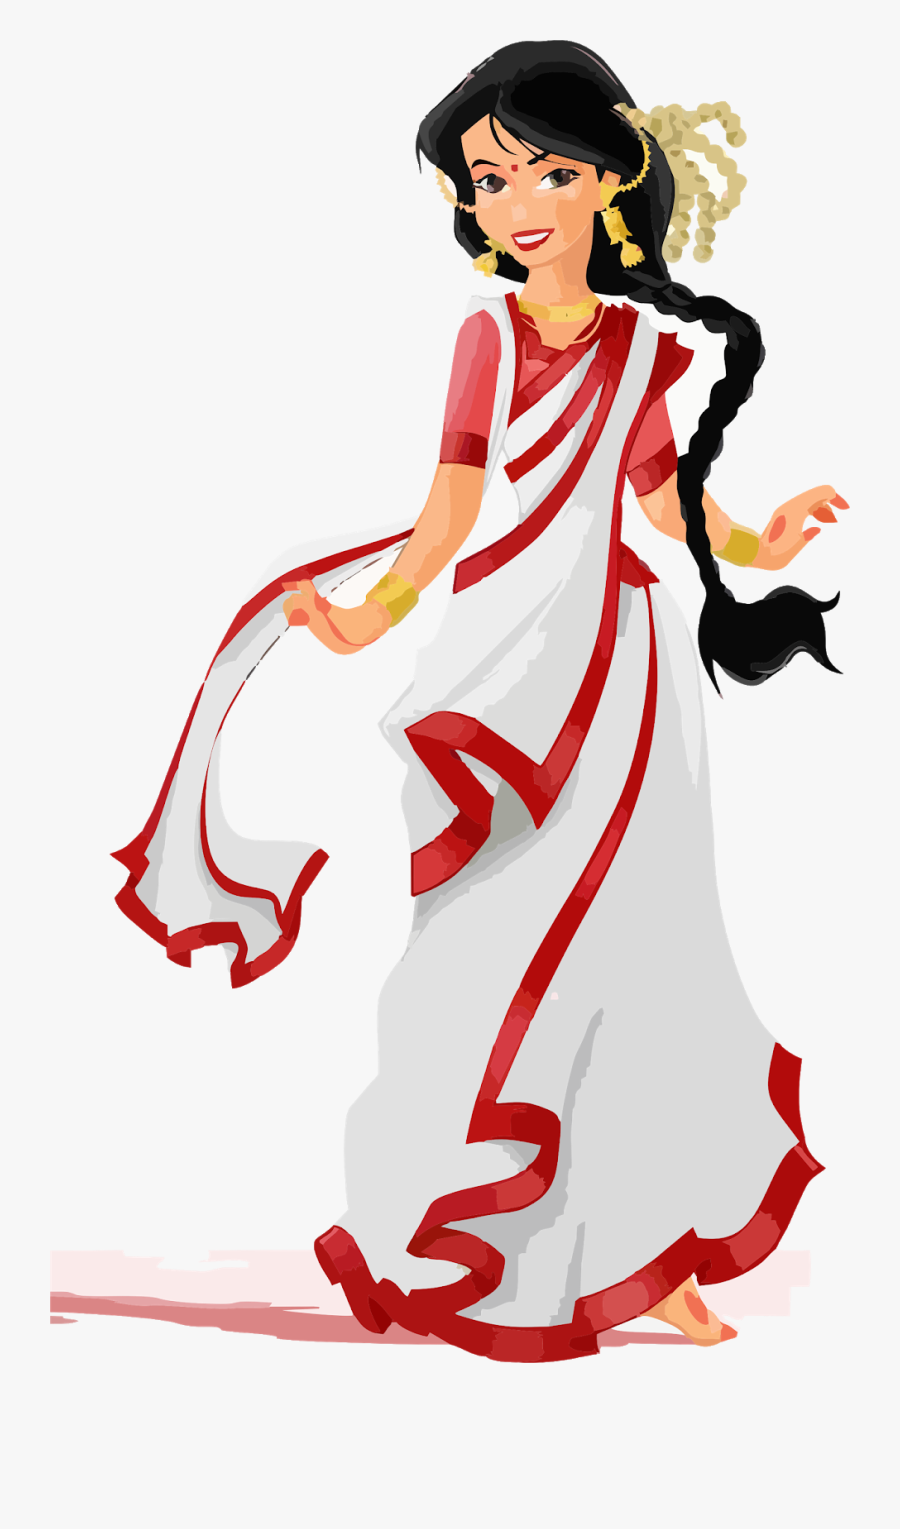 Bengali New Year 2019 Date, Transparent Clipart